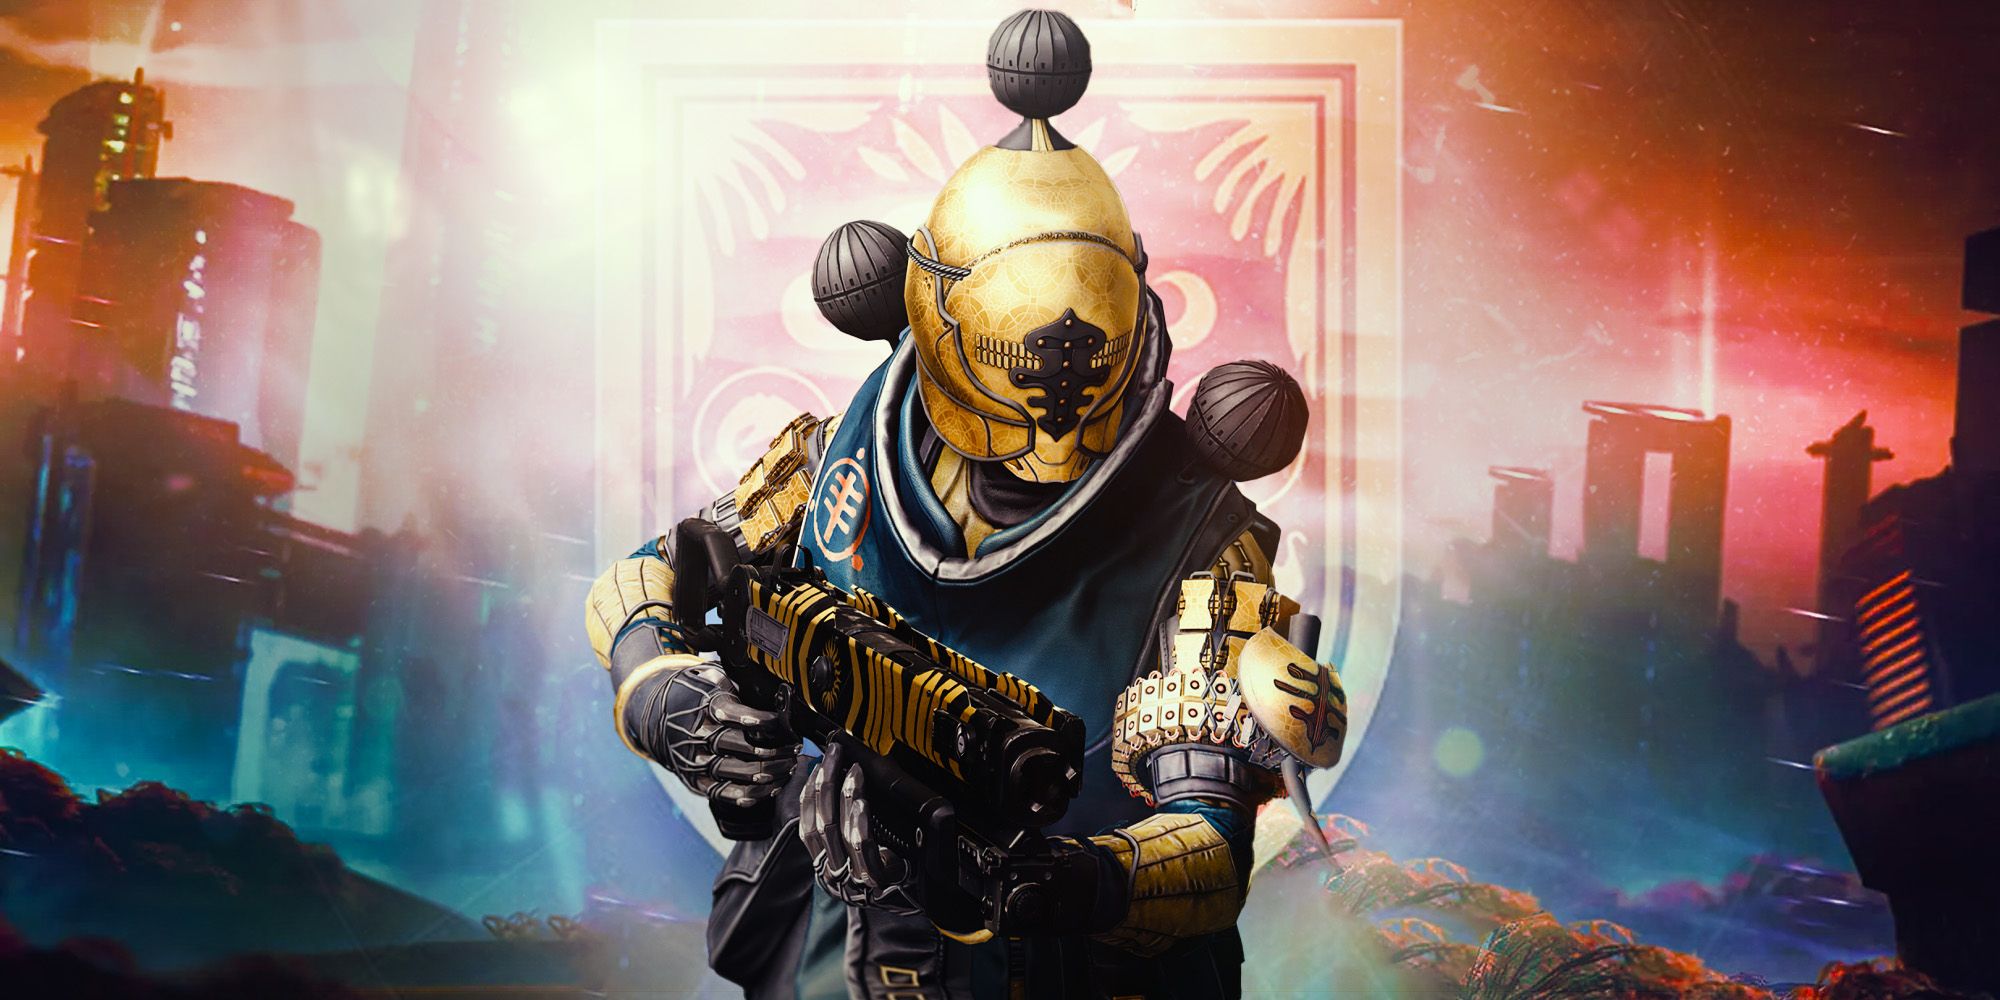 A Destiny 2 Warlock running with a weapon in hands while the sigil for th Aquanaut title lingers in the colorful background.